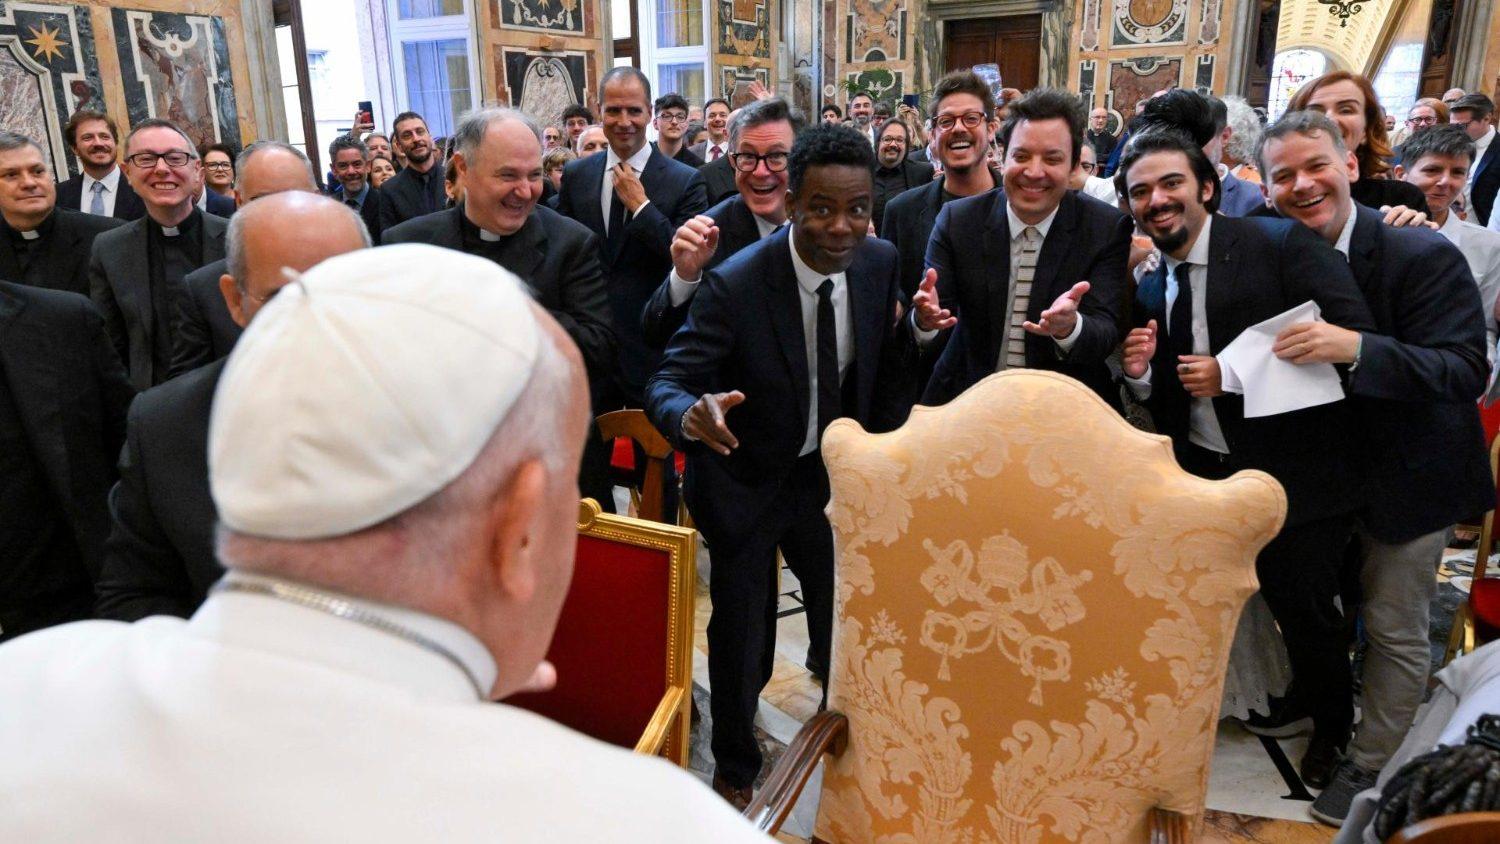 Comedians star-struck by ‘bizarre’ meeting with Pope Francis